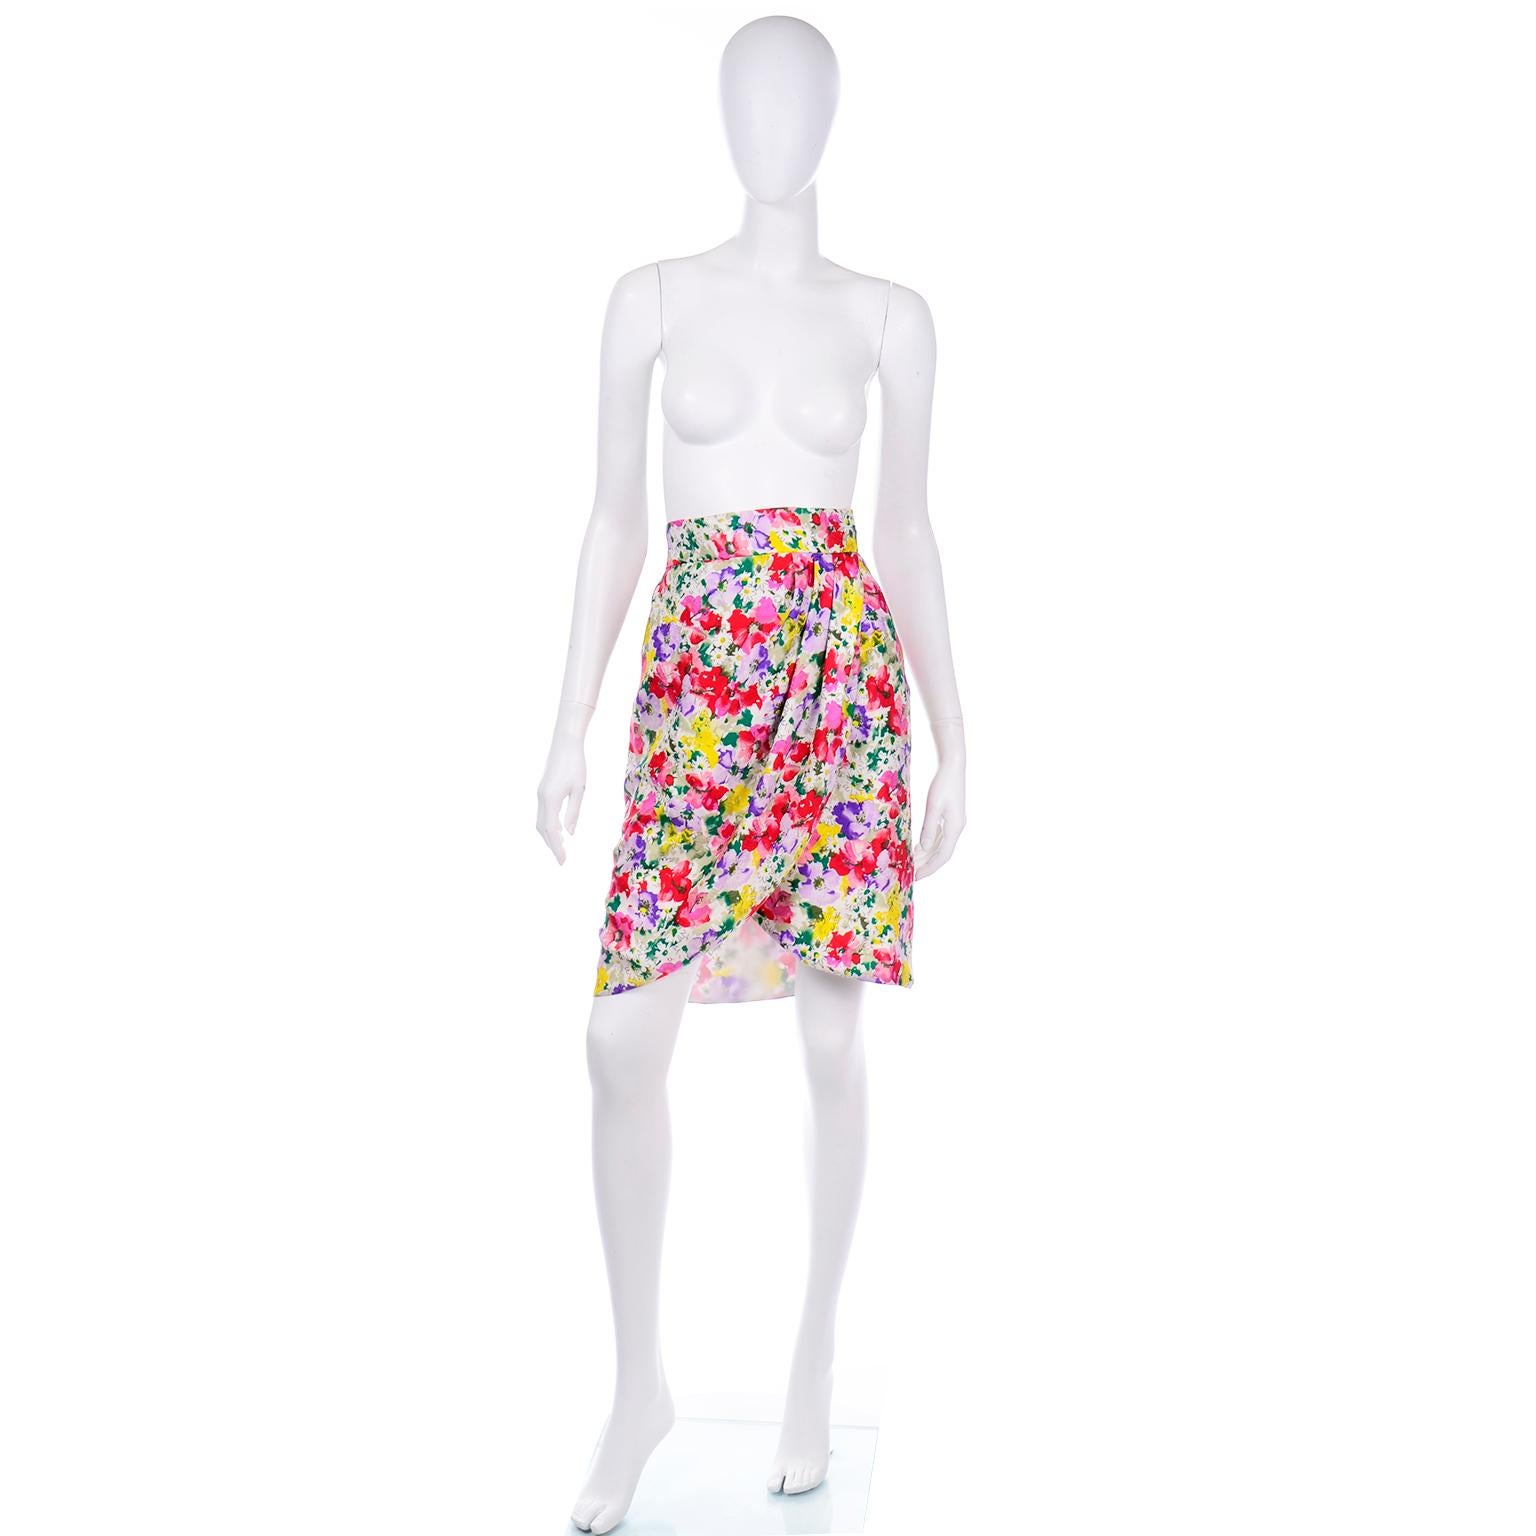 This is a vintage Raoul Arango colorful floral wrap style skirt in a multi colored silk.  The beautiful print is in shades of purple, pink, red, green, white, yellow, and lavender with black outlining. The hem of the skirt is rounded and is slightly